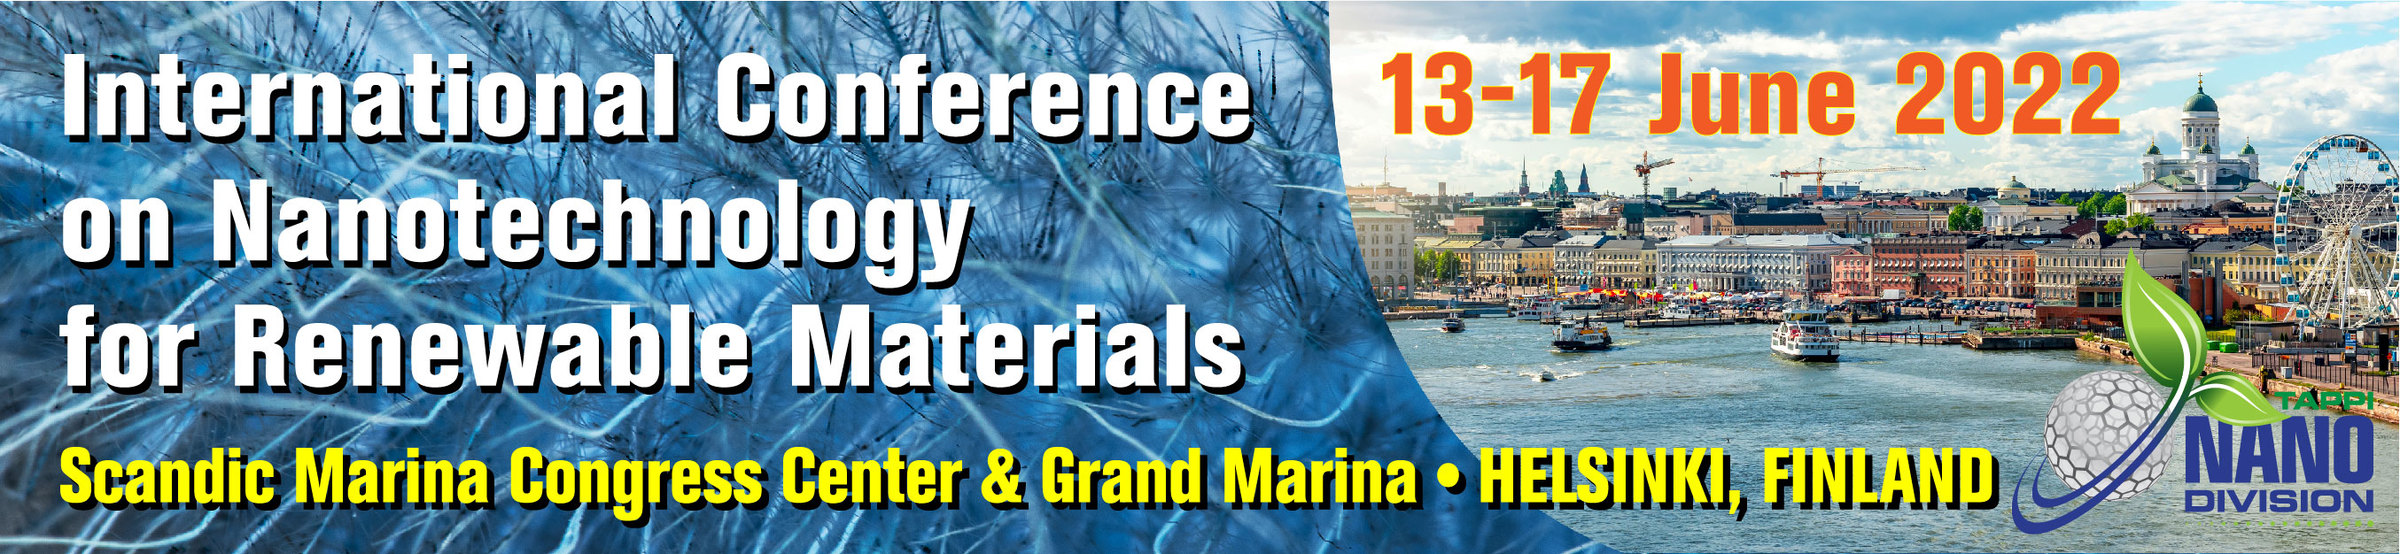 2022 International Conference on Nanotechnology for Renewable Materials  